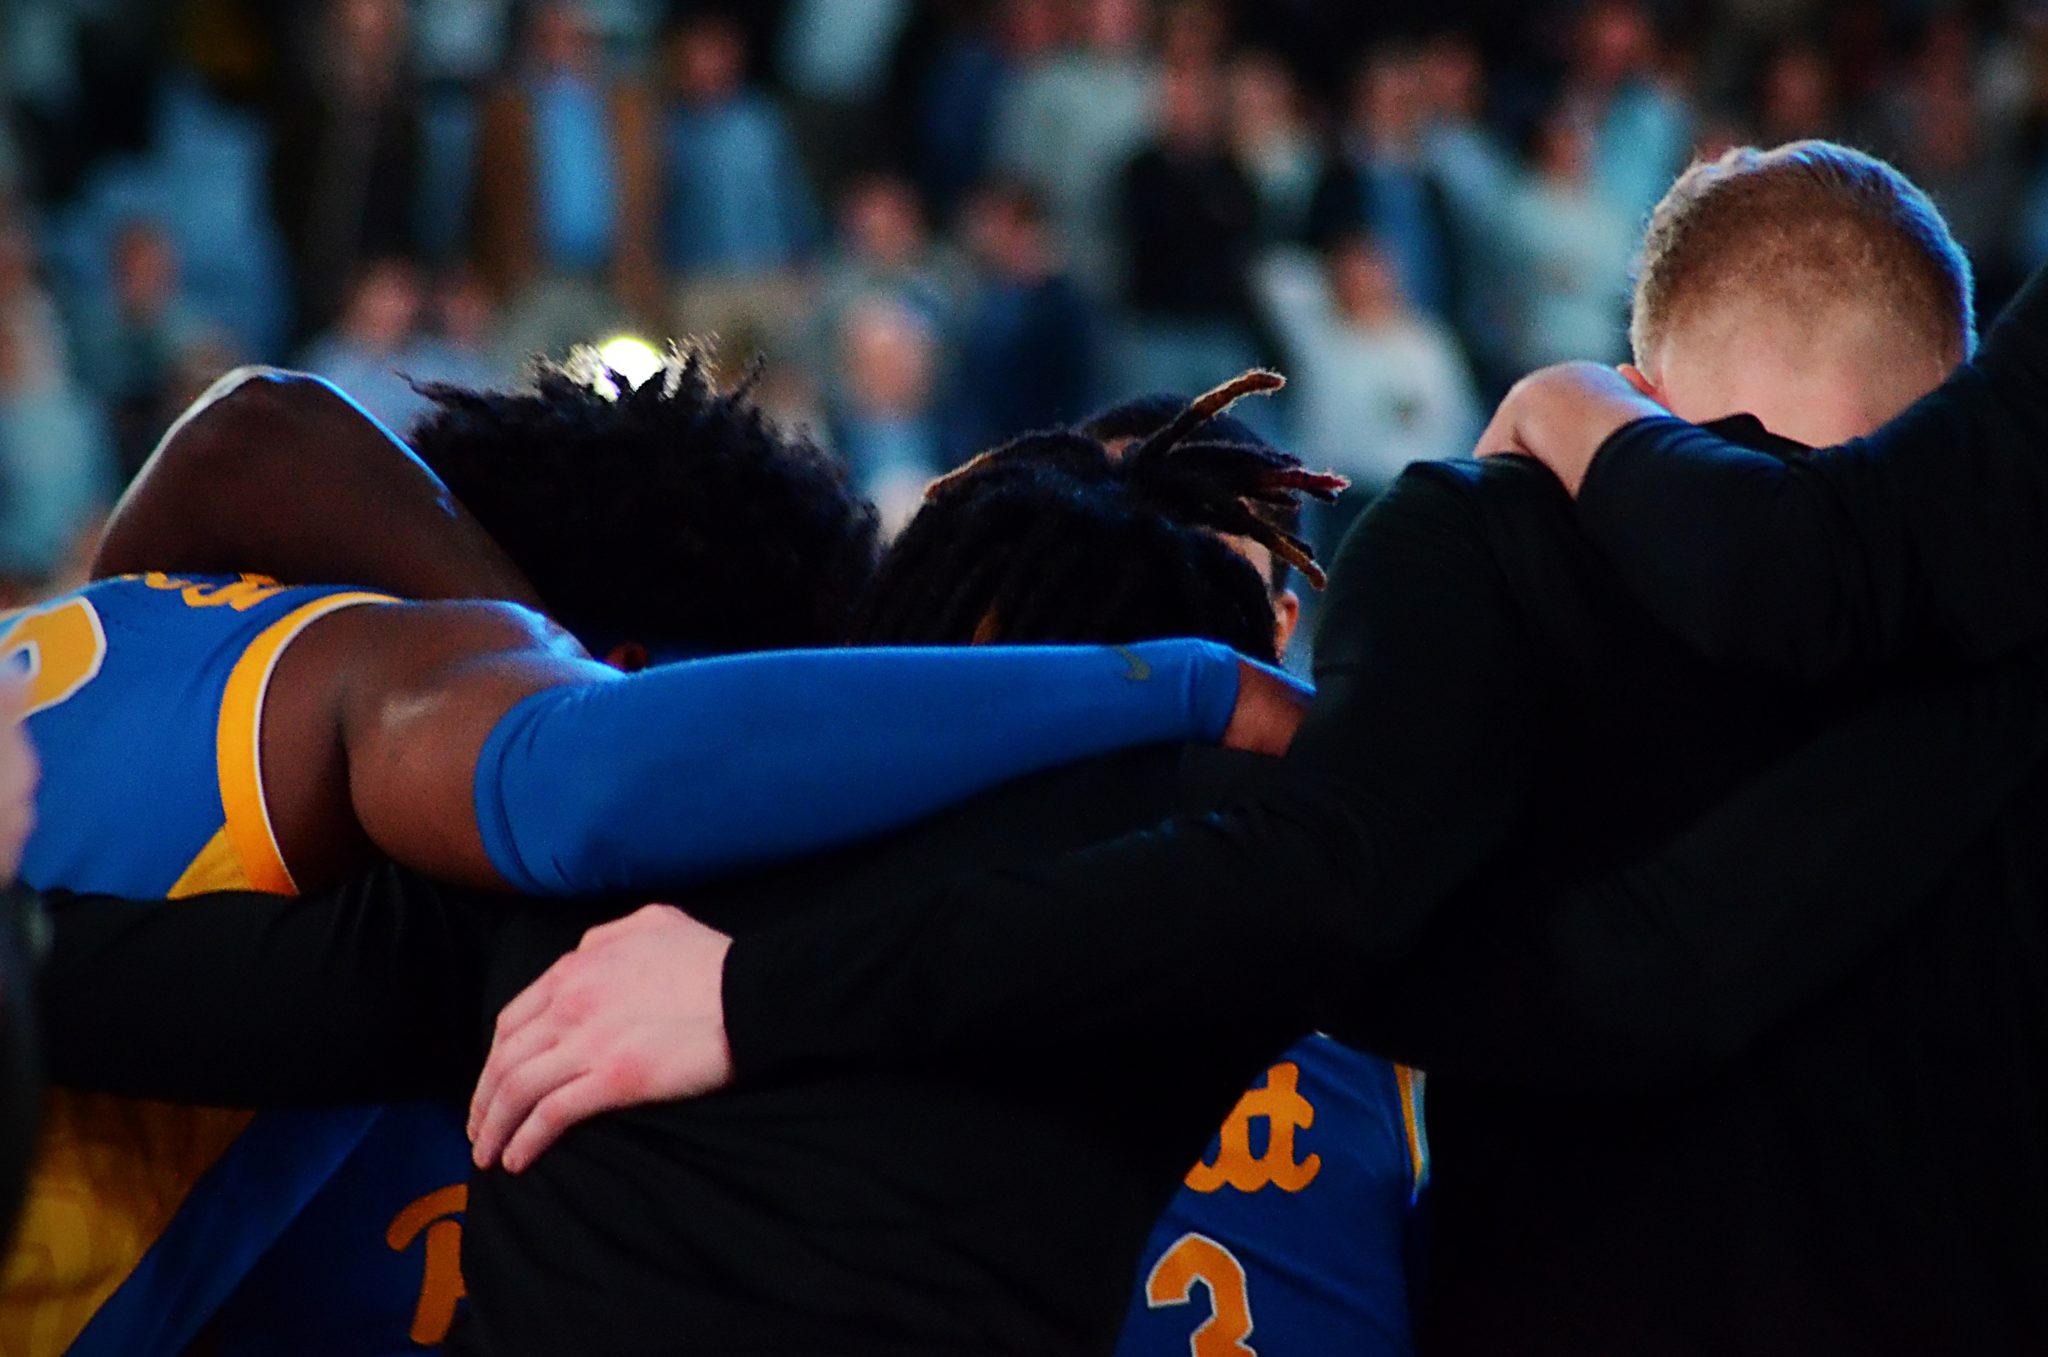 Pitt's basketball team huddles before playing against North Carolina on Wednesday, Feb. 1, 2023 in Chapel Hill. (Mitchell Northam / Pittsburgh Sports Now)